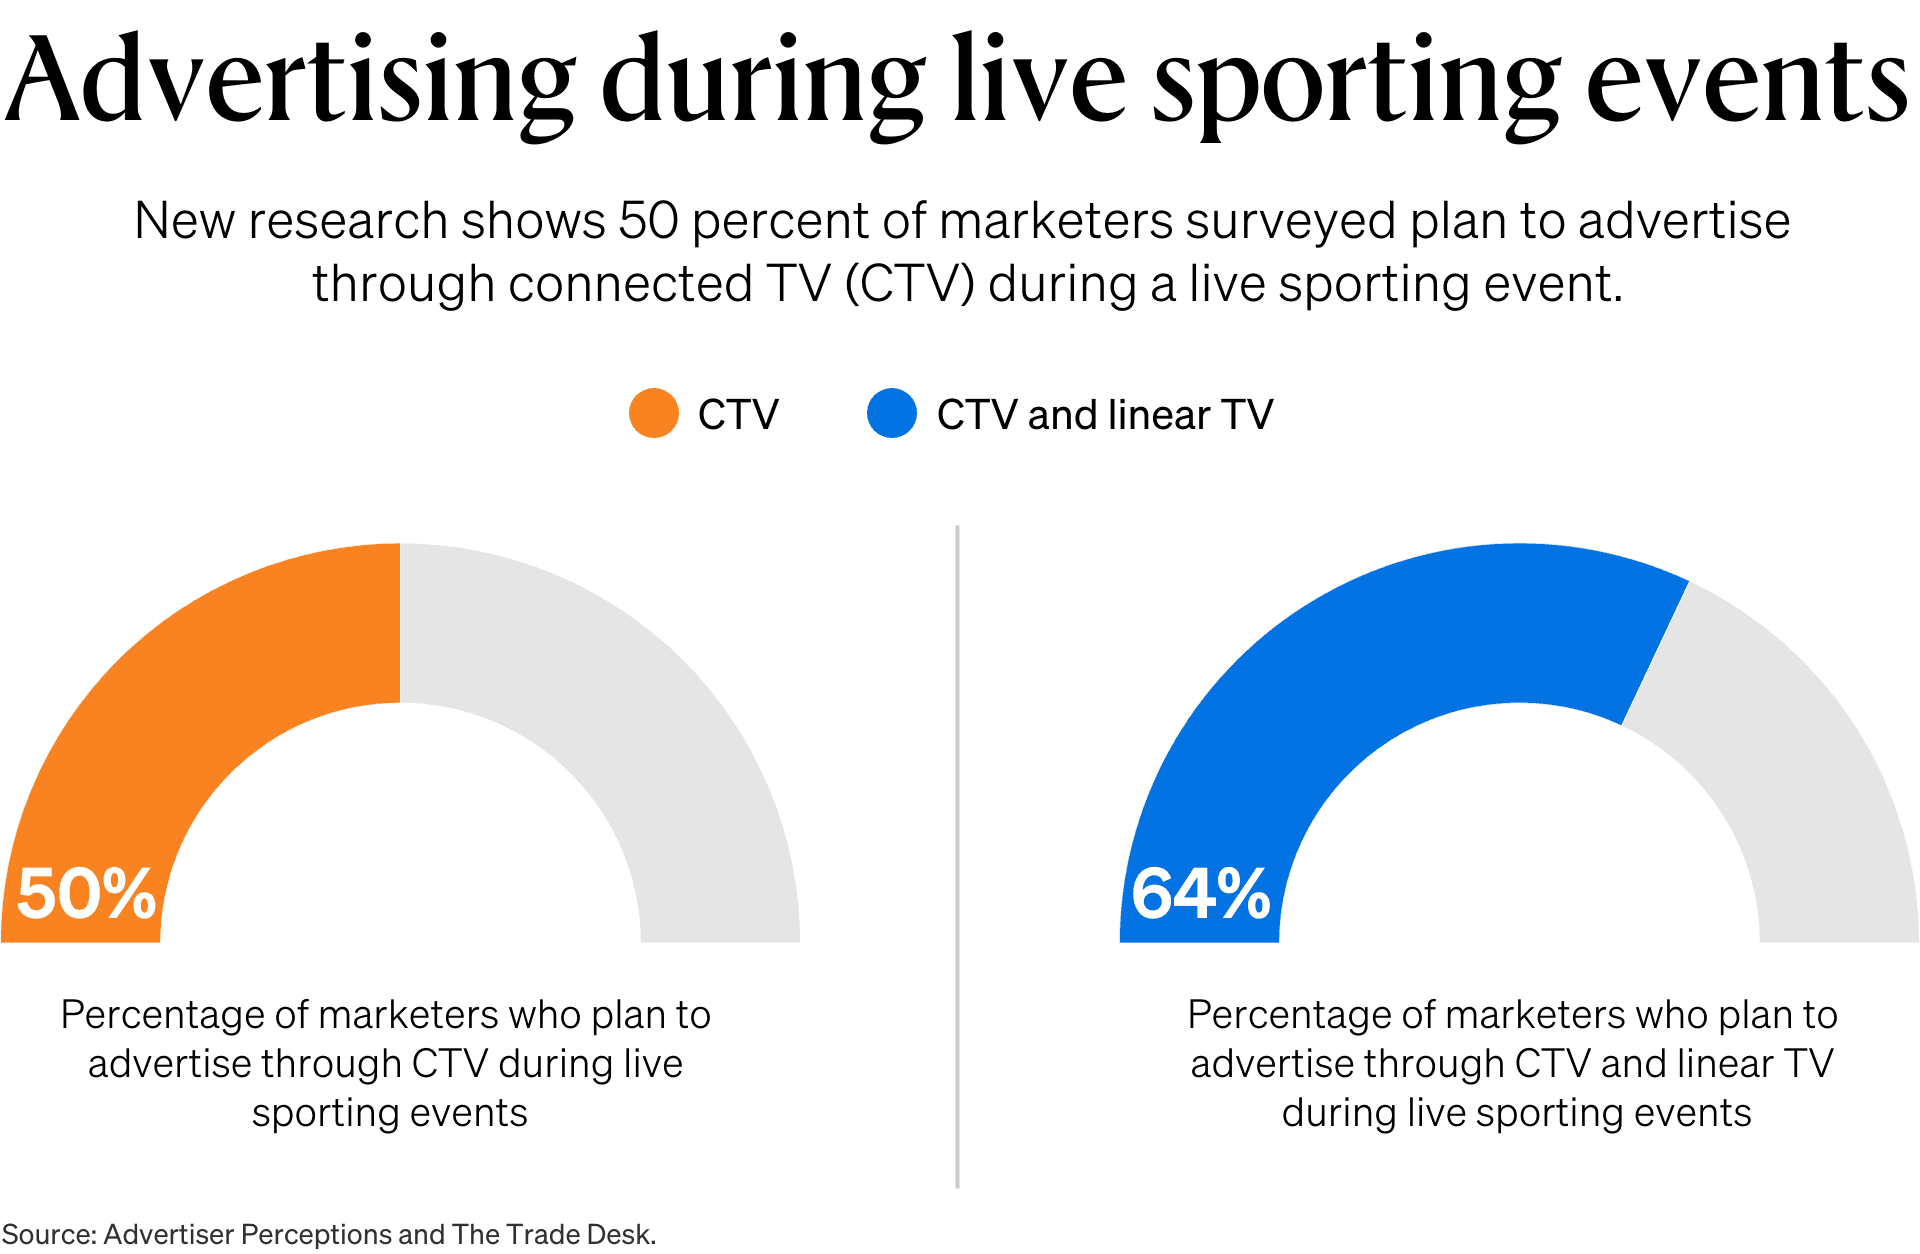 Advertising during live sporting events data visualization - New research shows 50% of marketers surveyed plan to advertise through Connected TV (CTV) during a live sporting event.